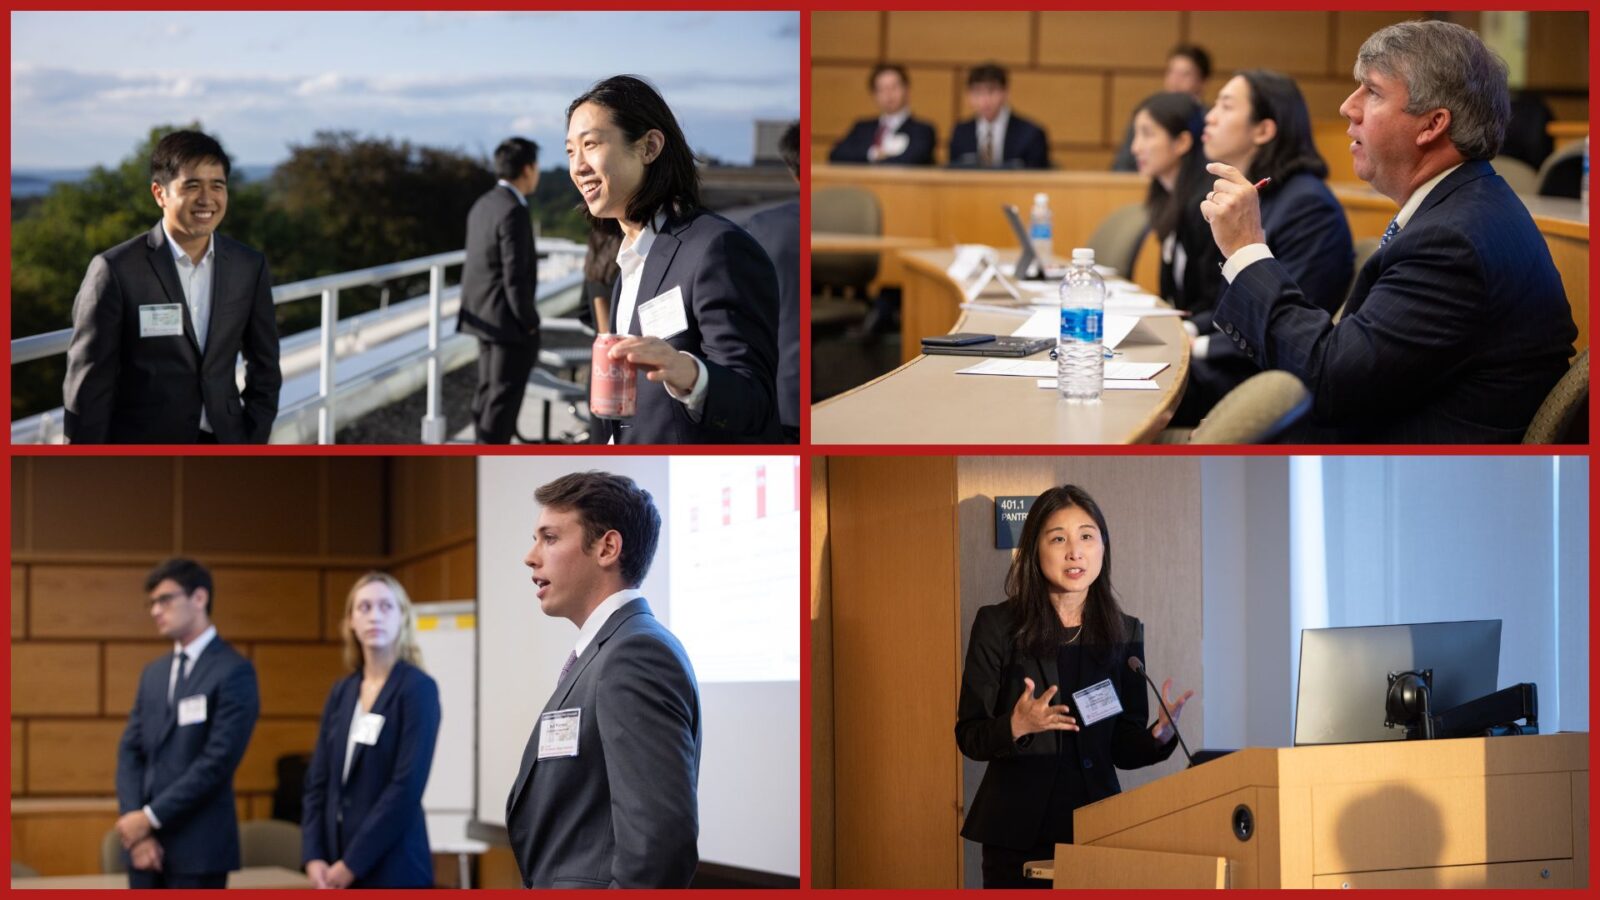 Four images from the Undergraduate Stock Pitch Challenge 2023. Top right photo is 3 people networking on a rooftop. Top left photo is a judge speaking to presenters. Bottom right photo is a keynote speaker. Bottom left is three students presenting.